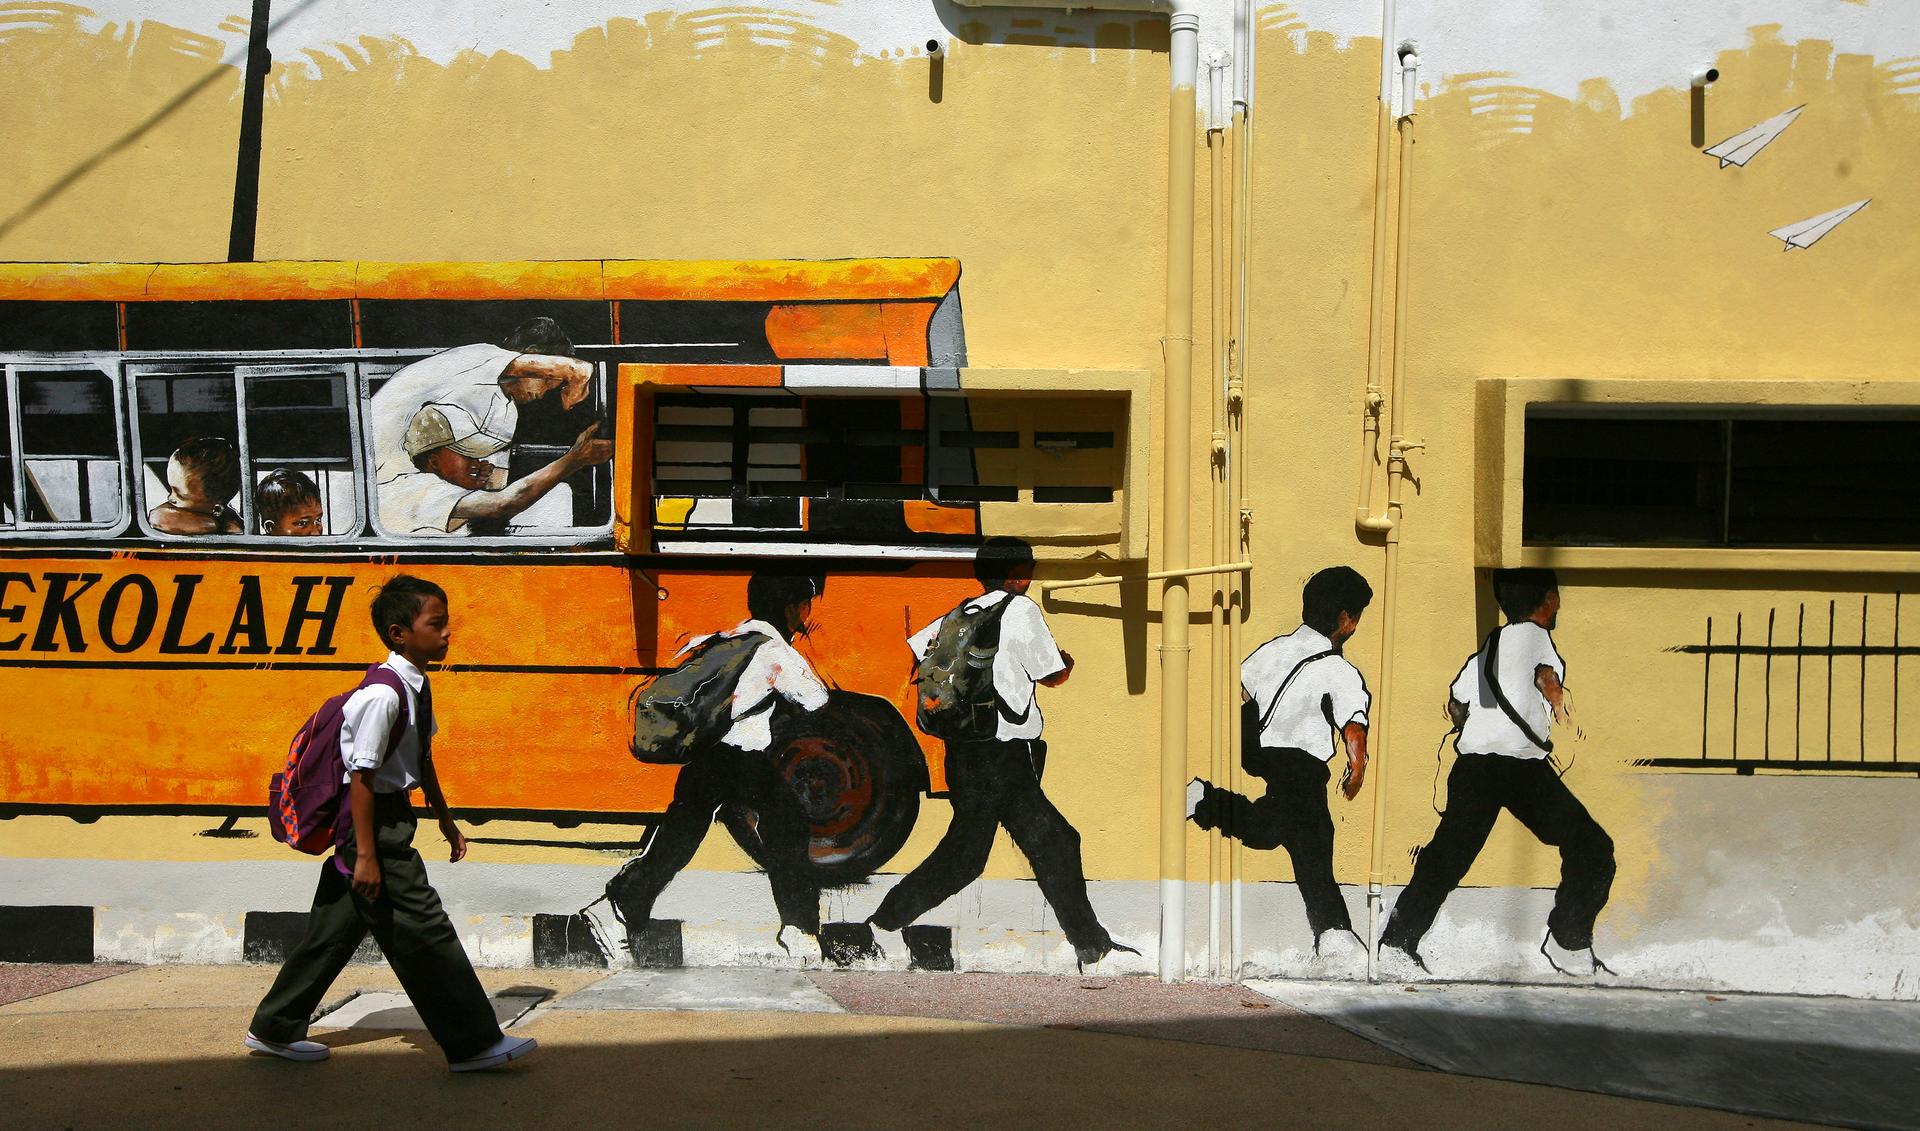 A Malaysian school boy walks past a street mural depicting a school bus and students.